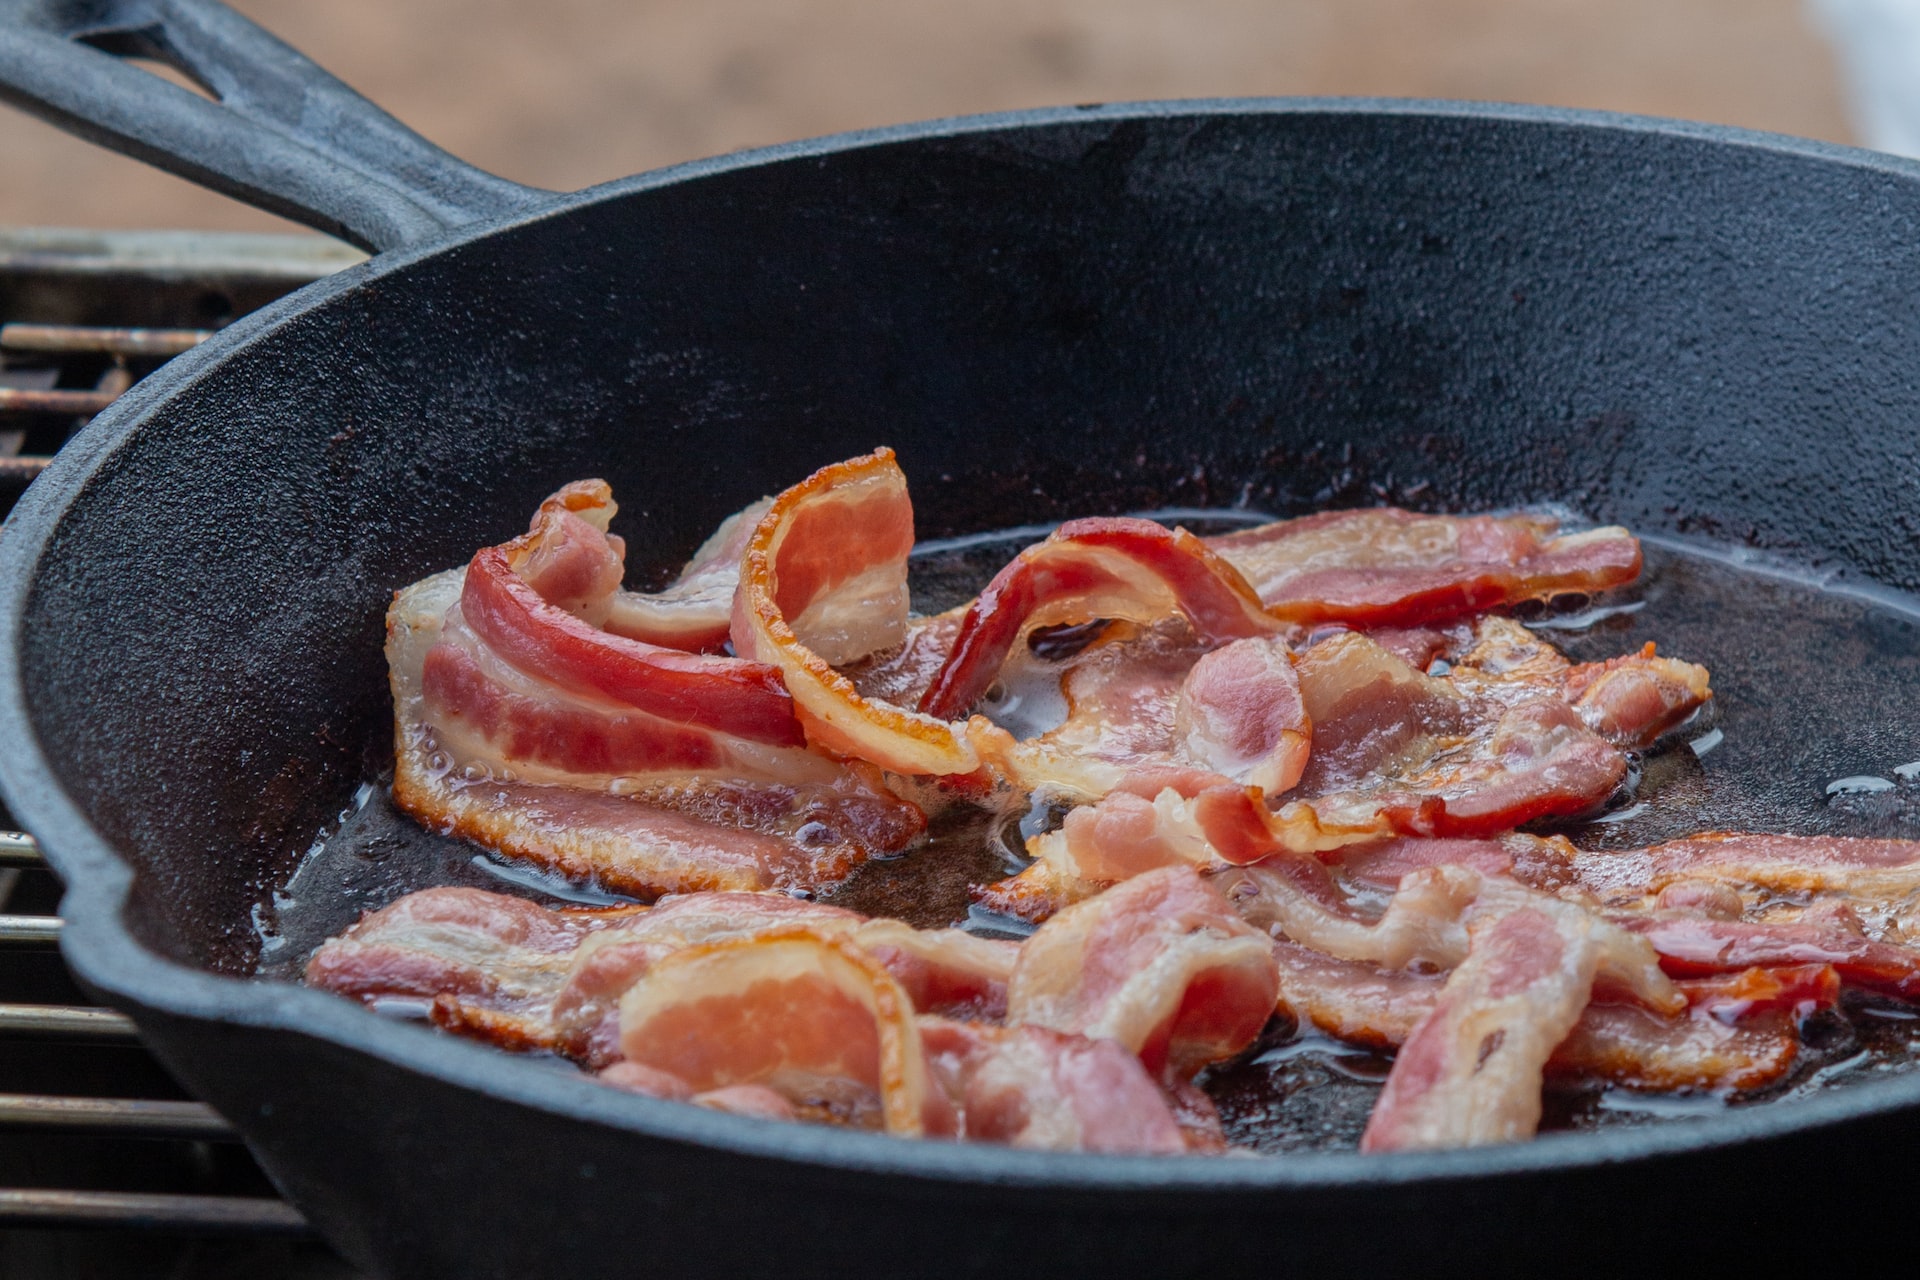 BREAKING! New Info on Bacon’s Cancer Risk Stuns Millions